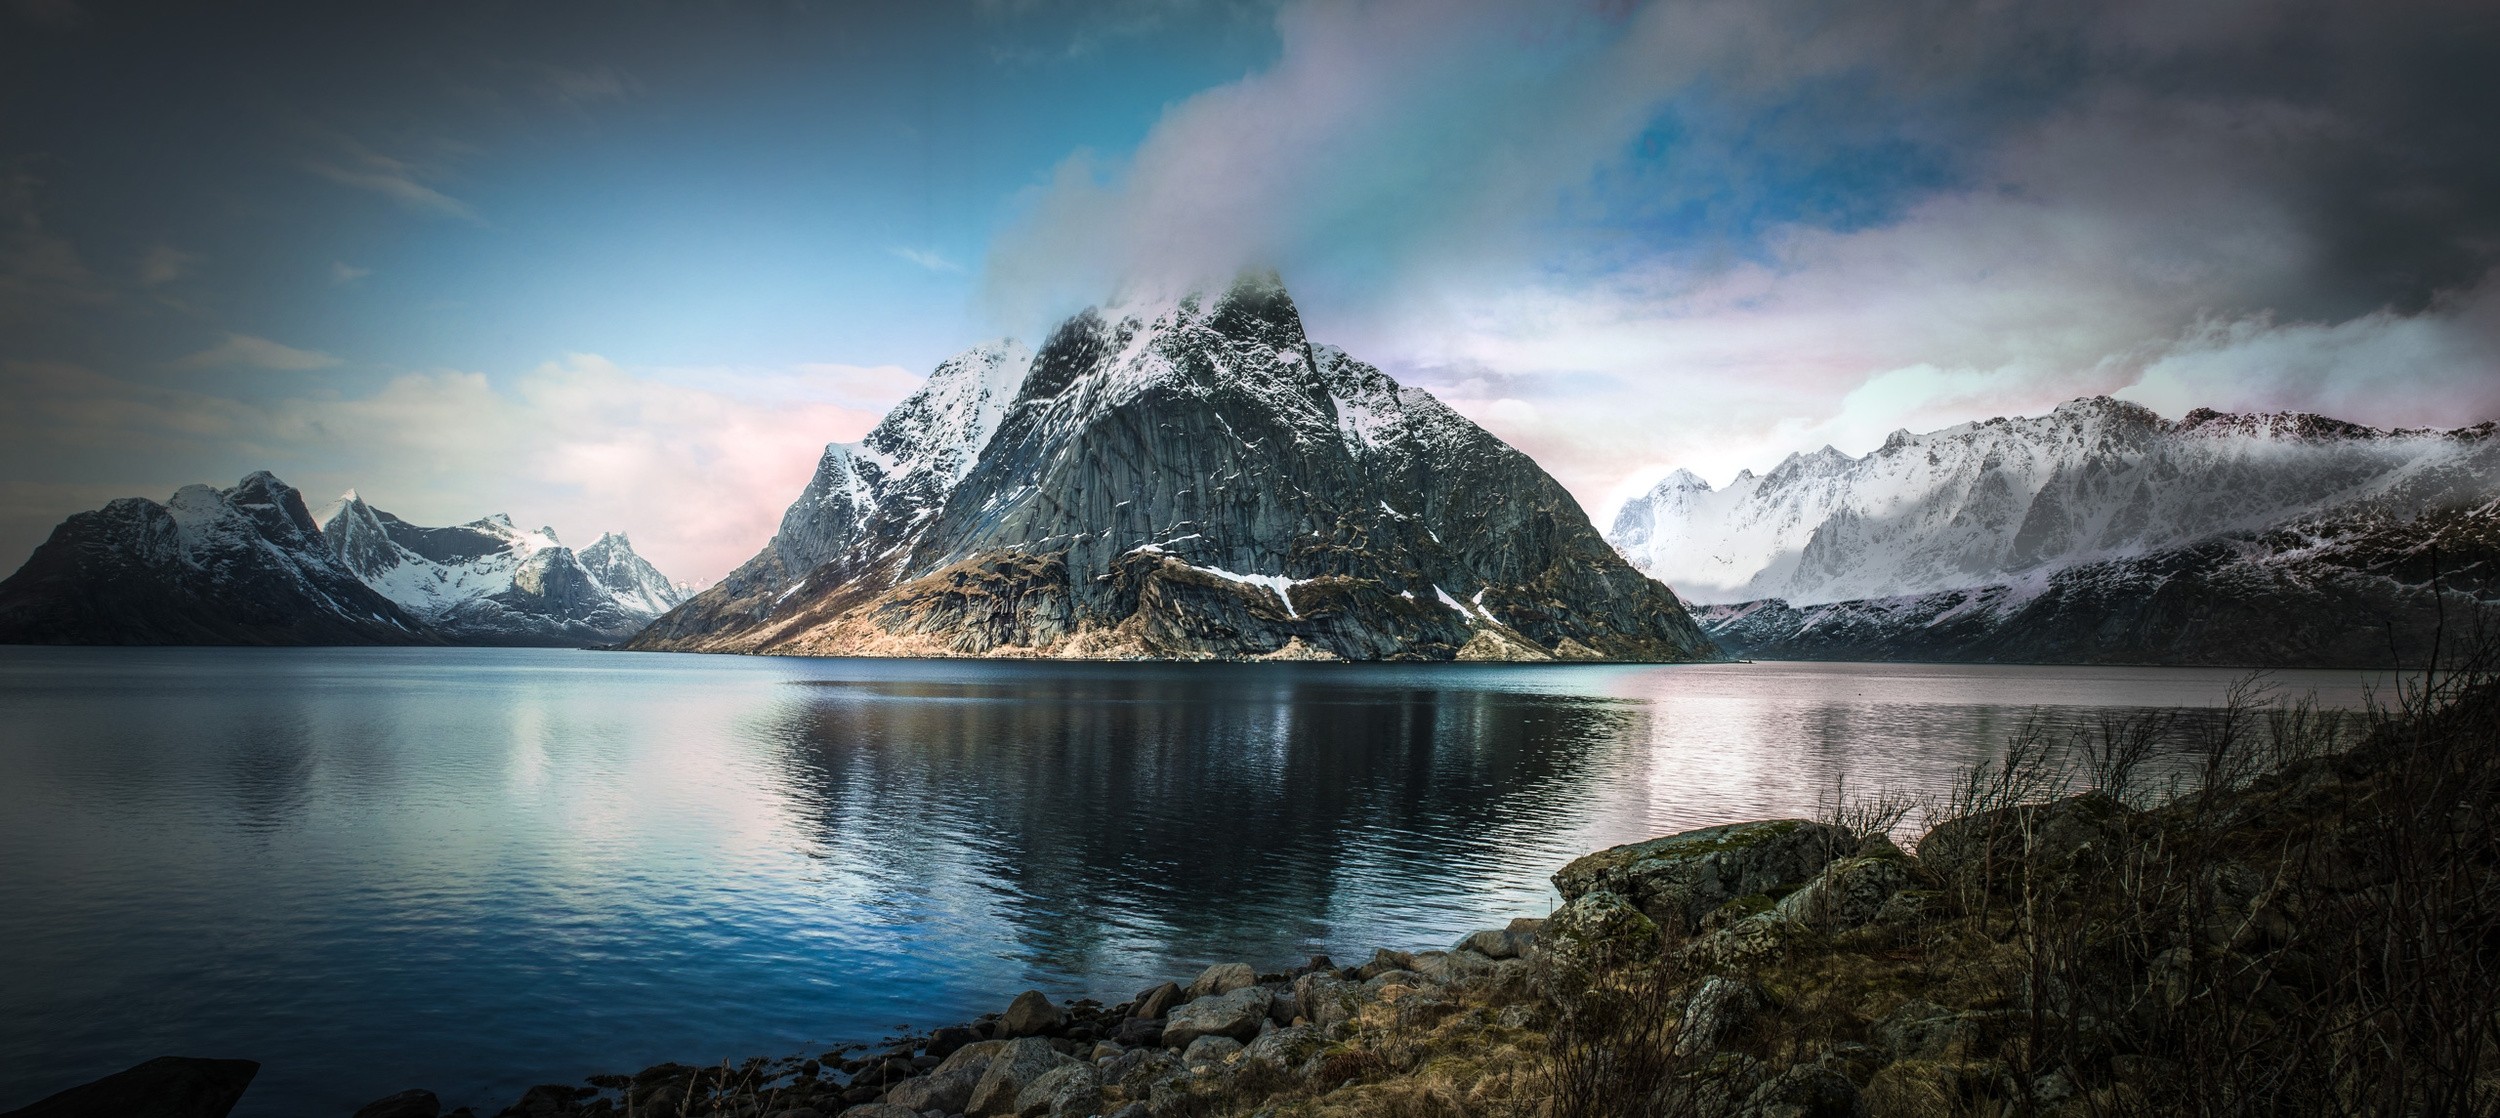 General 2500x1118 nature landscape fjord mountains snowy peak clouds Norway spring Arctic blue water sea lake